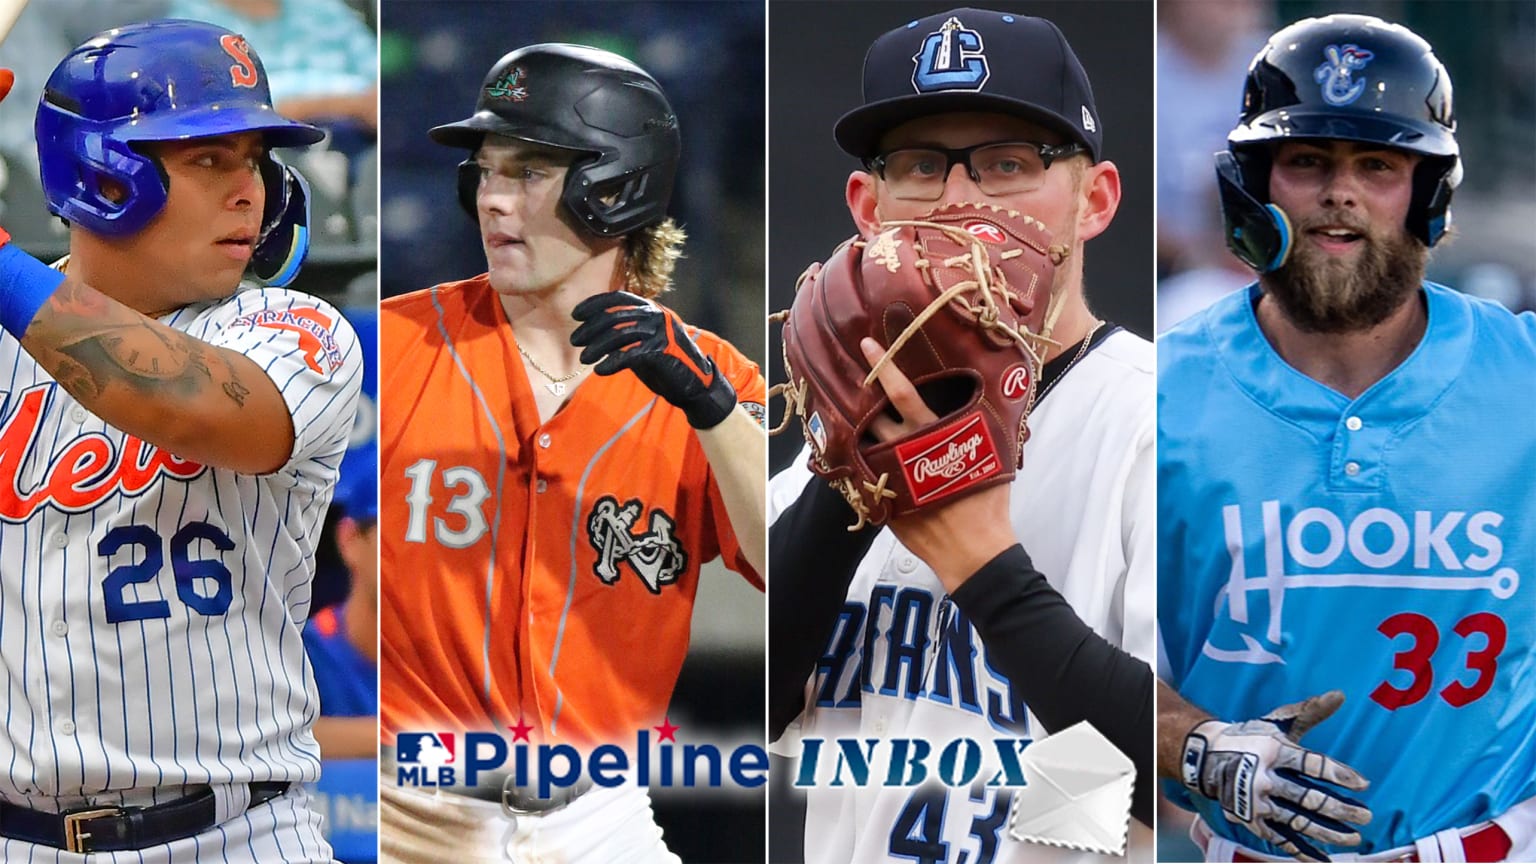 4 prospects in various game action shots and the words ''Pipeline Inbox'' across the bottom